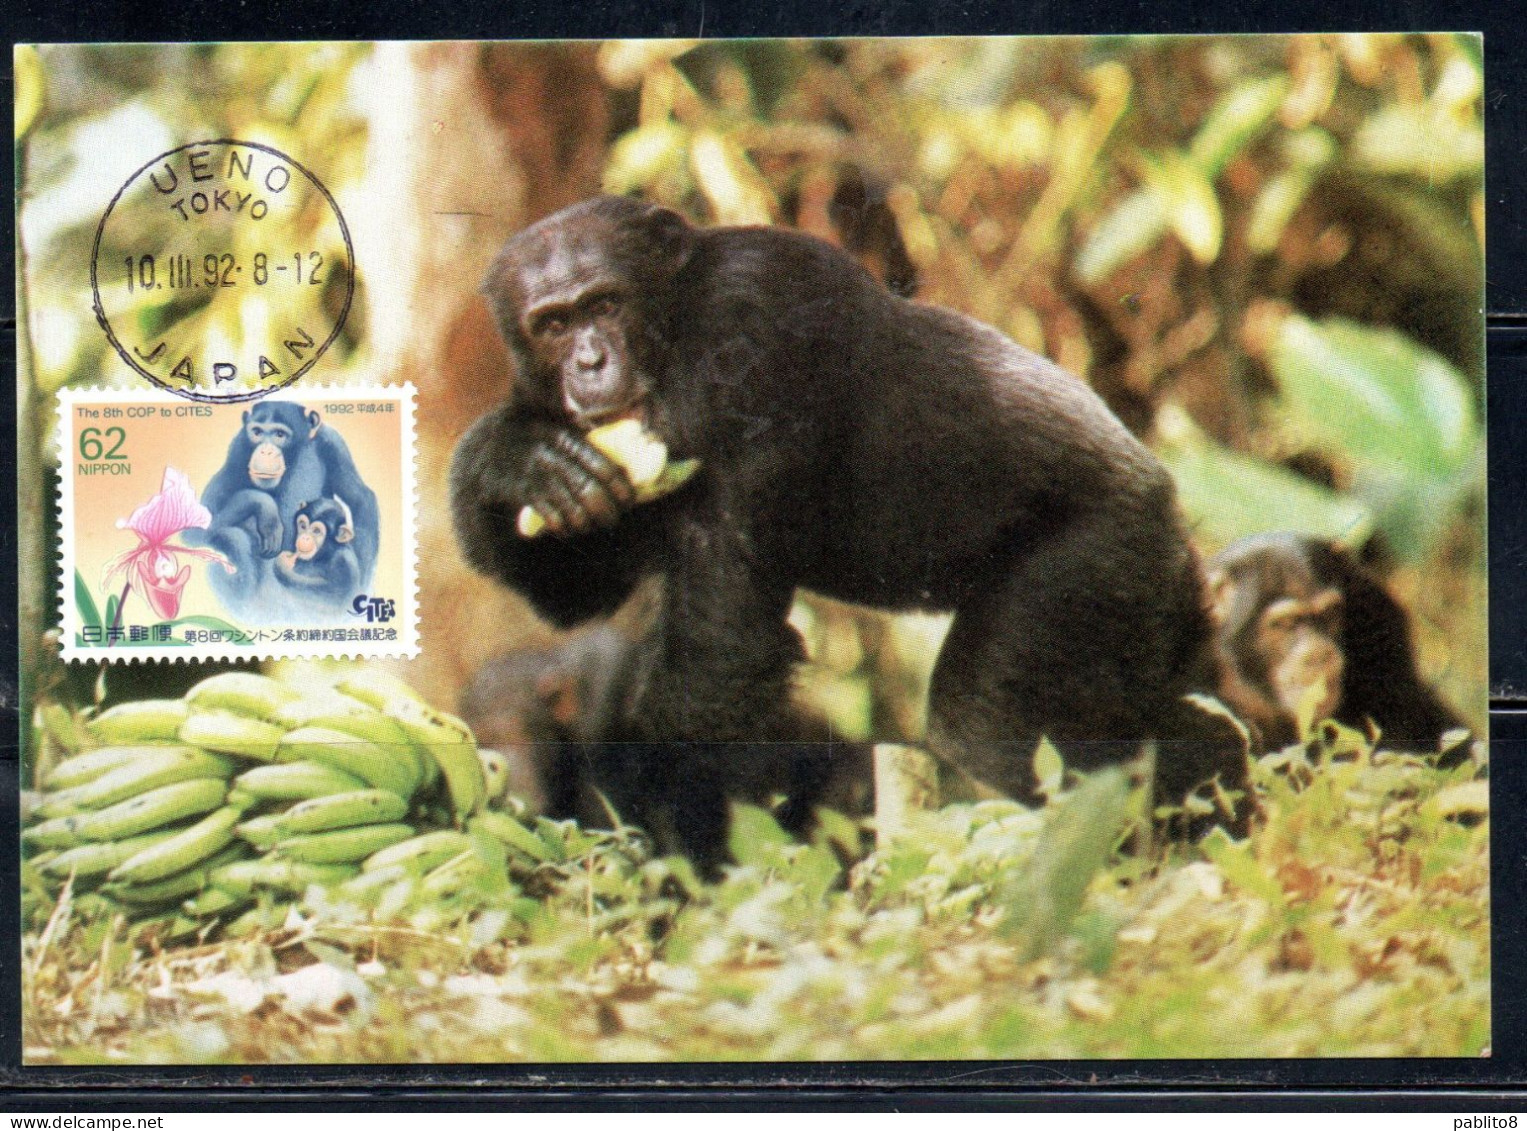 JAPAN GIAPPONE 1992 CONFERENCE ON INTERNATIONAL TRADE IN ENDANGERED SPECIES CITES CHIMPANZEES 62y MAXI MAXIMUM CARD - Cartoline Maximum